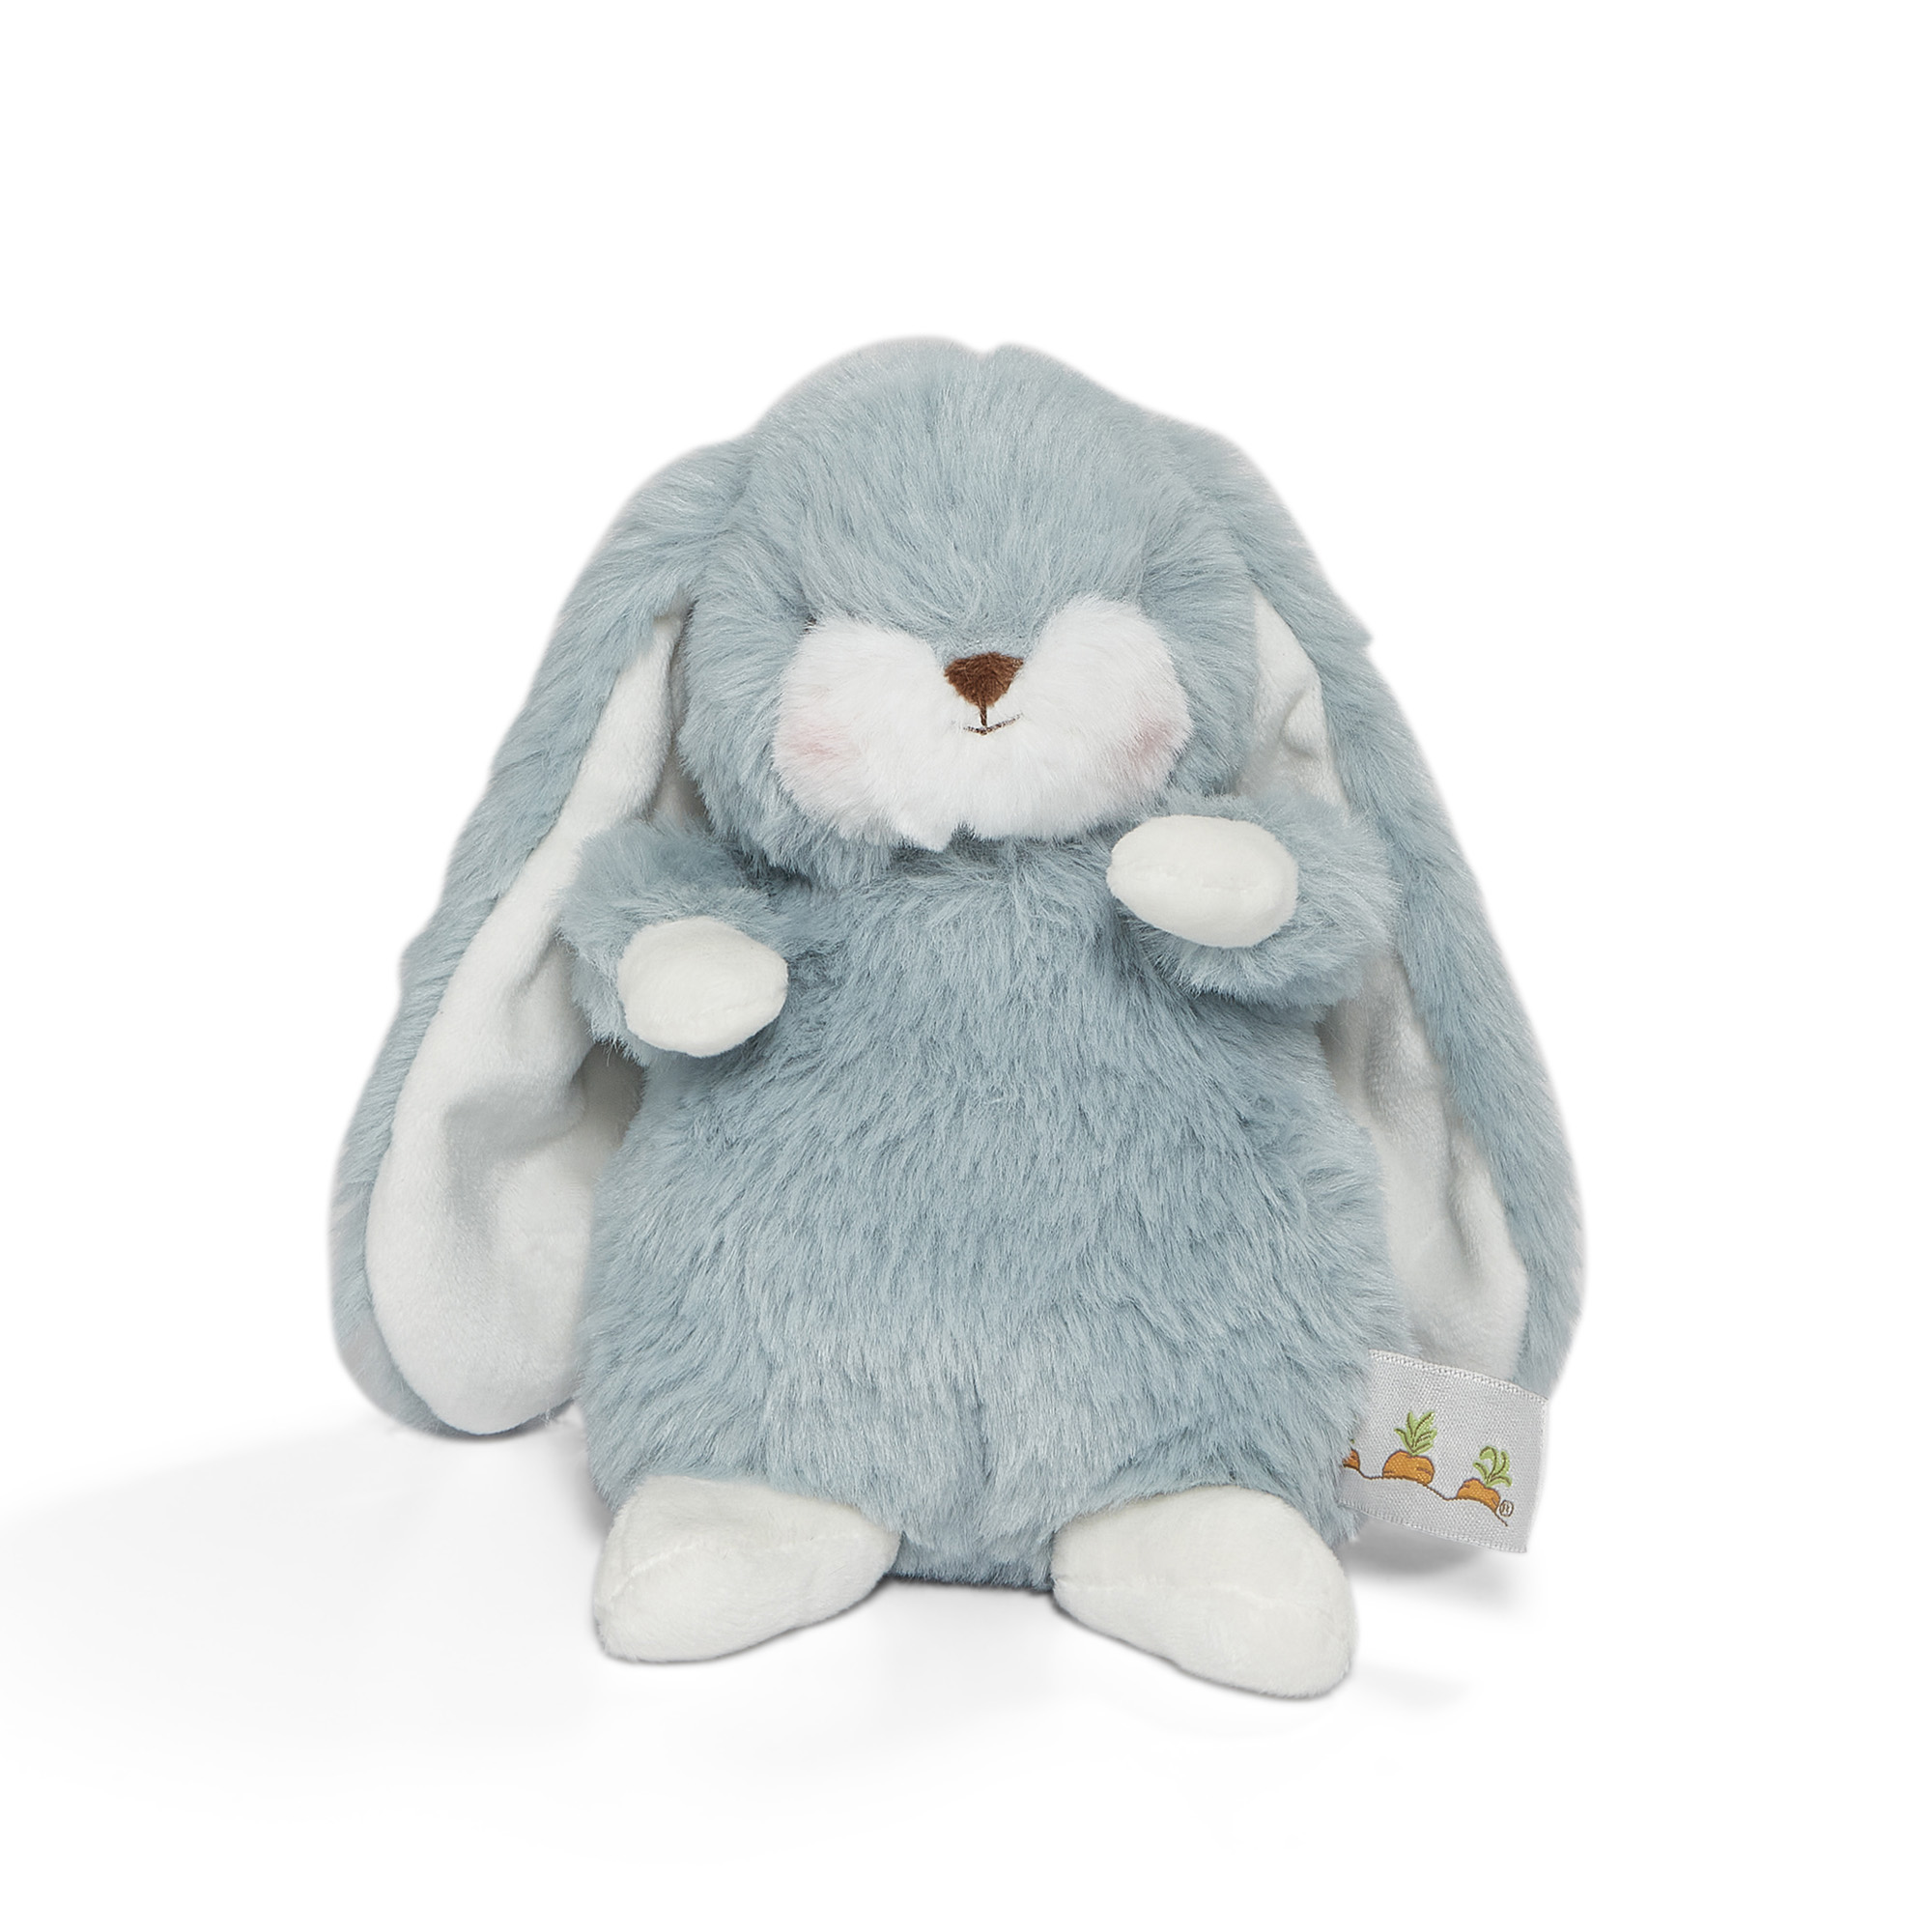 Peluche tiny nibble stormy blue 20cm - Bunnies By The Bay